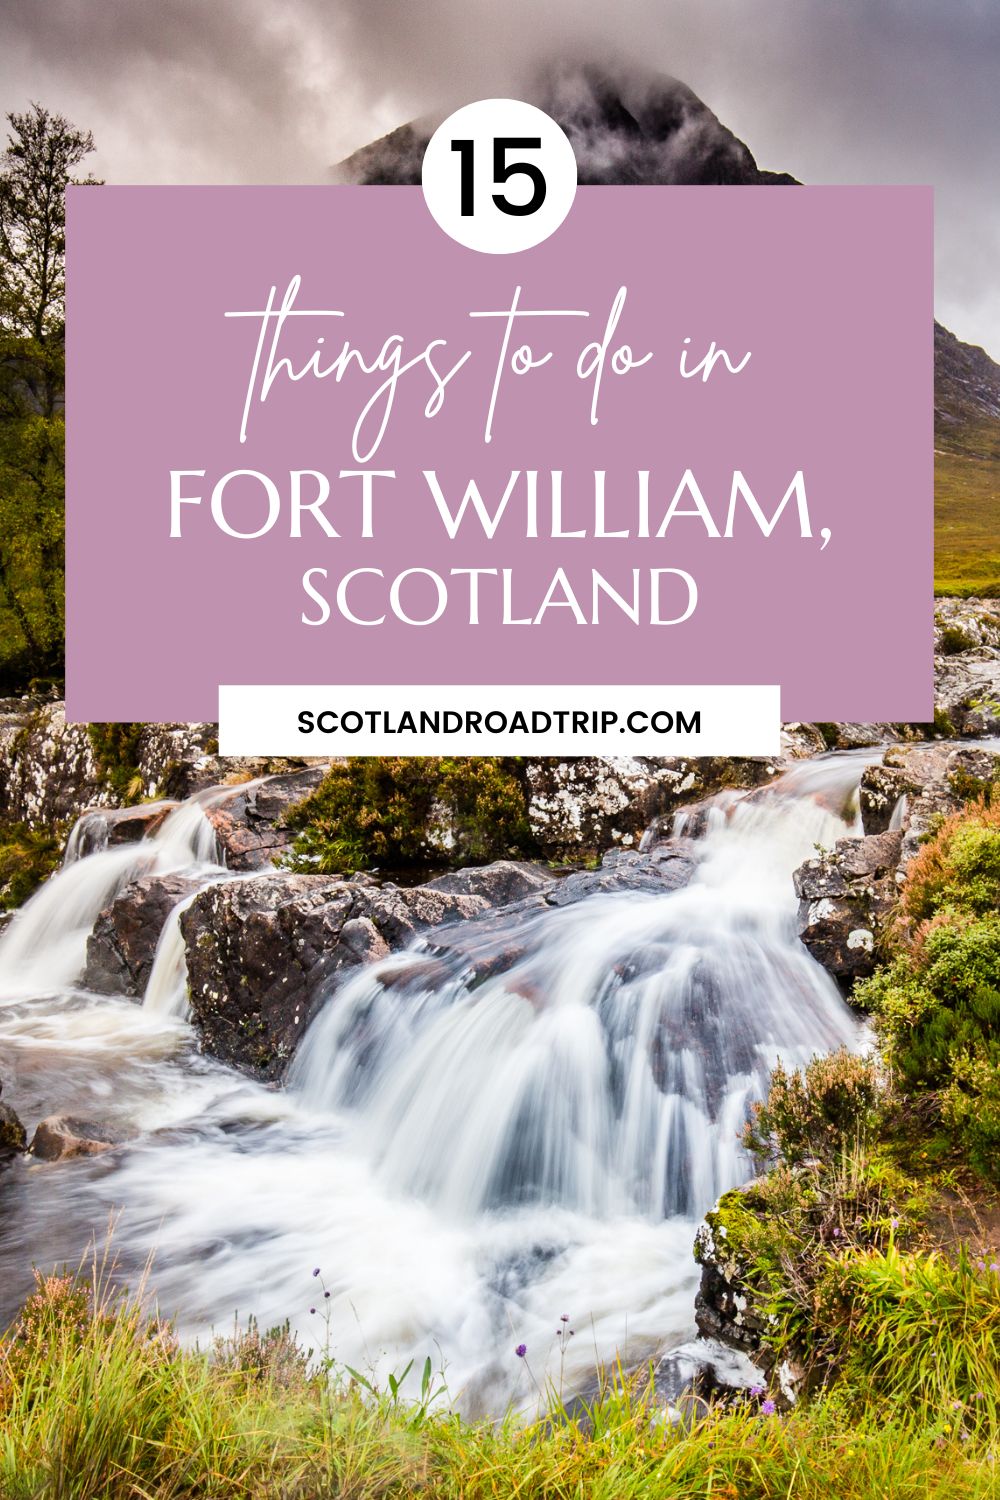 15 things to do in Fort William, Scotland